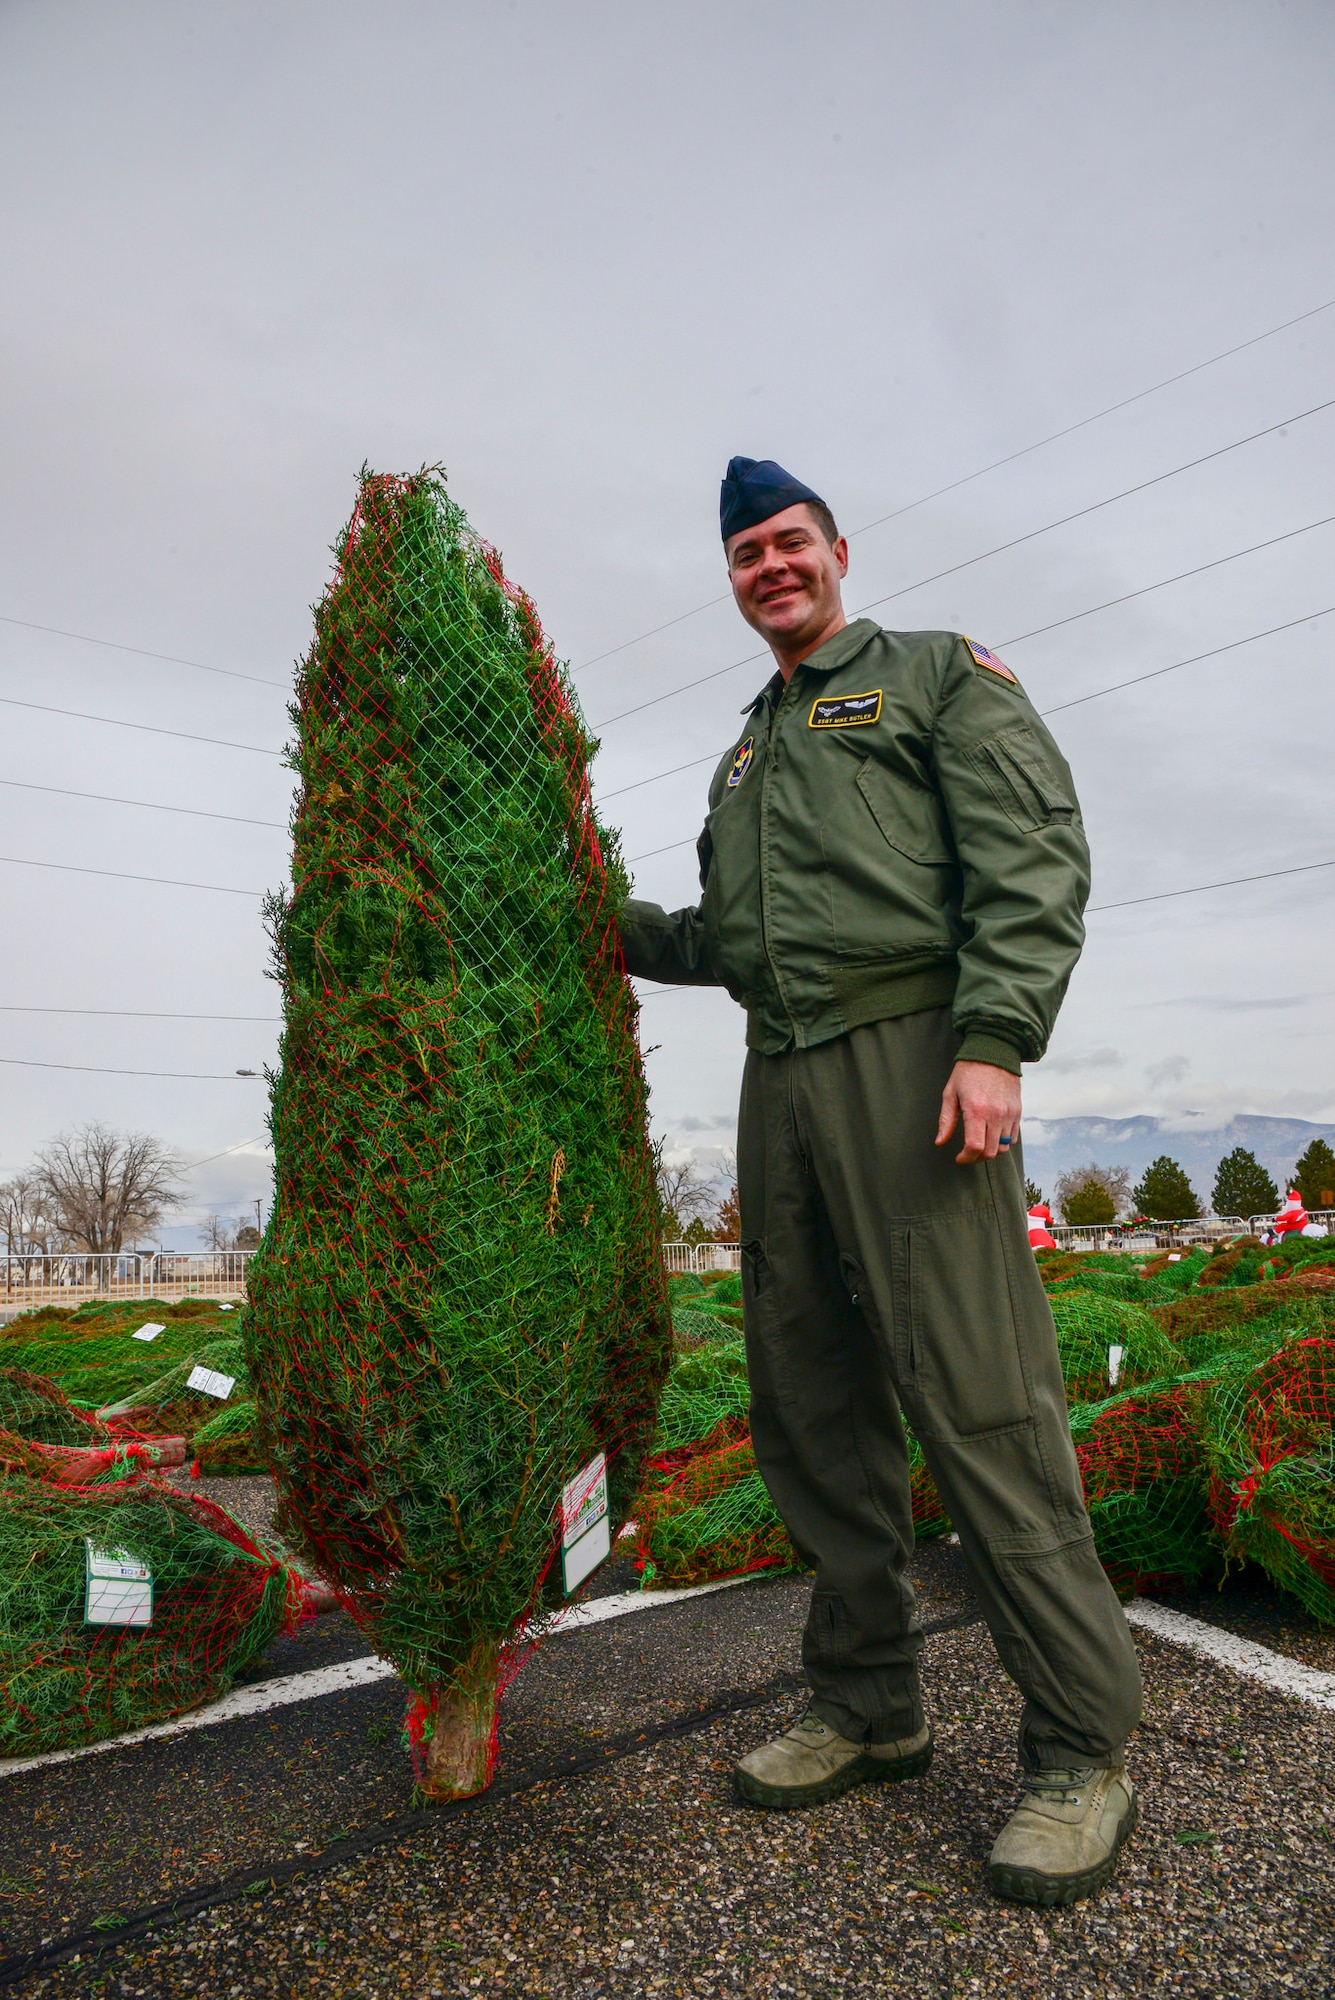 Staff Sgt. Mike Butler, 415th Special Operations Squadron, poses with a Christmas tree he picked out during the Trees for Troops event Dec. 7 at the base chapel here.  The two-day event provided free trees for members of Team Kirtland. Last year the program delivered 17,400 Christmas trees to 70 U.S. military bases; 250 trees delivered to four international bases; and is in its 14th year. (U.S. Air Force photo by Jessie Perkins)